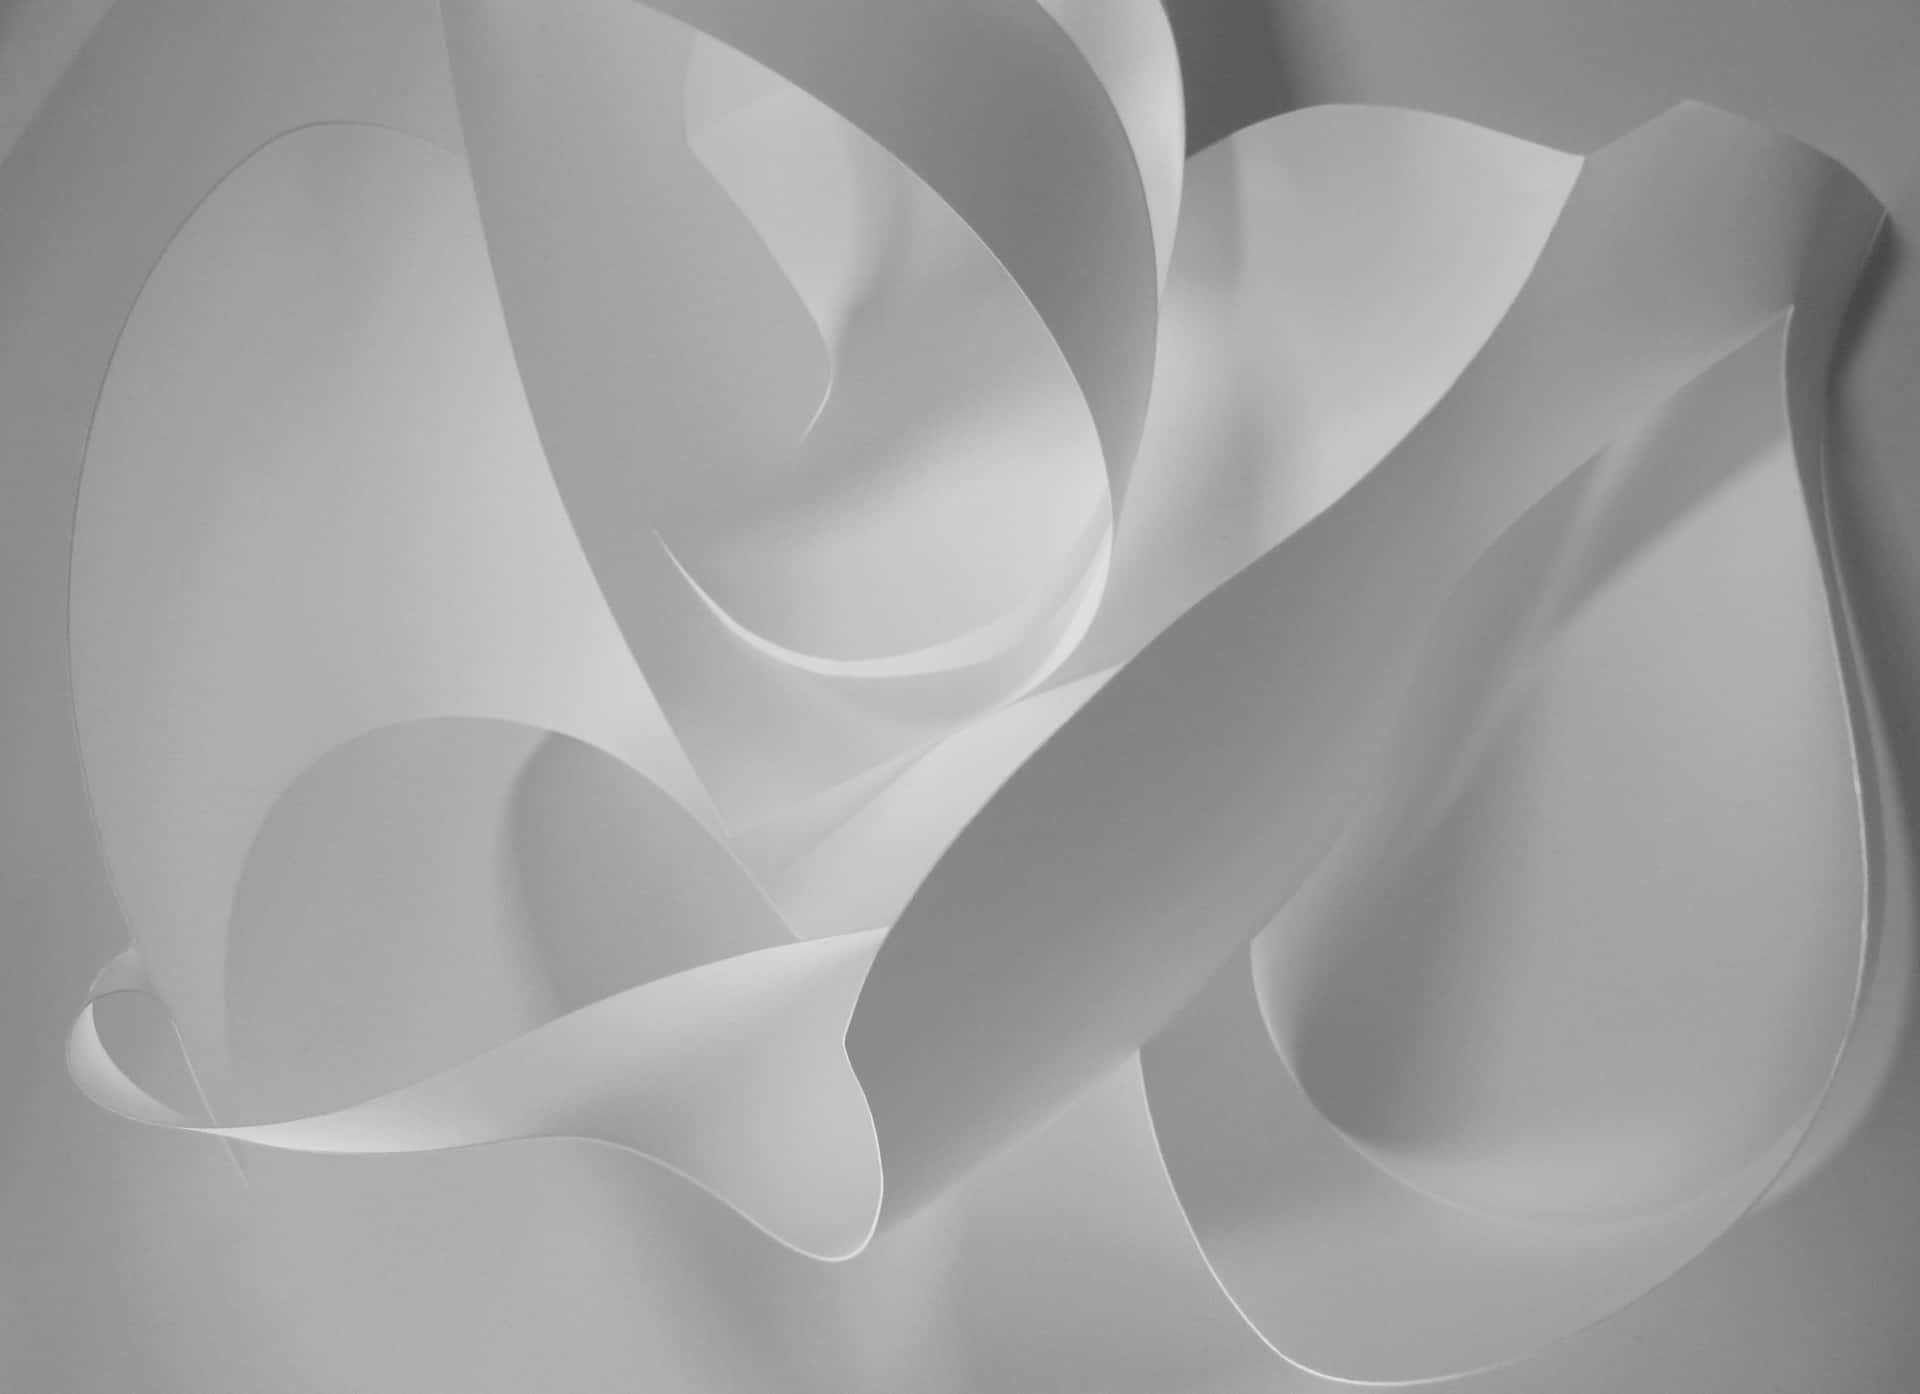 White Image Background Abstract Shapes